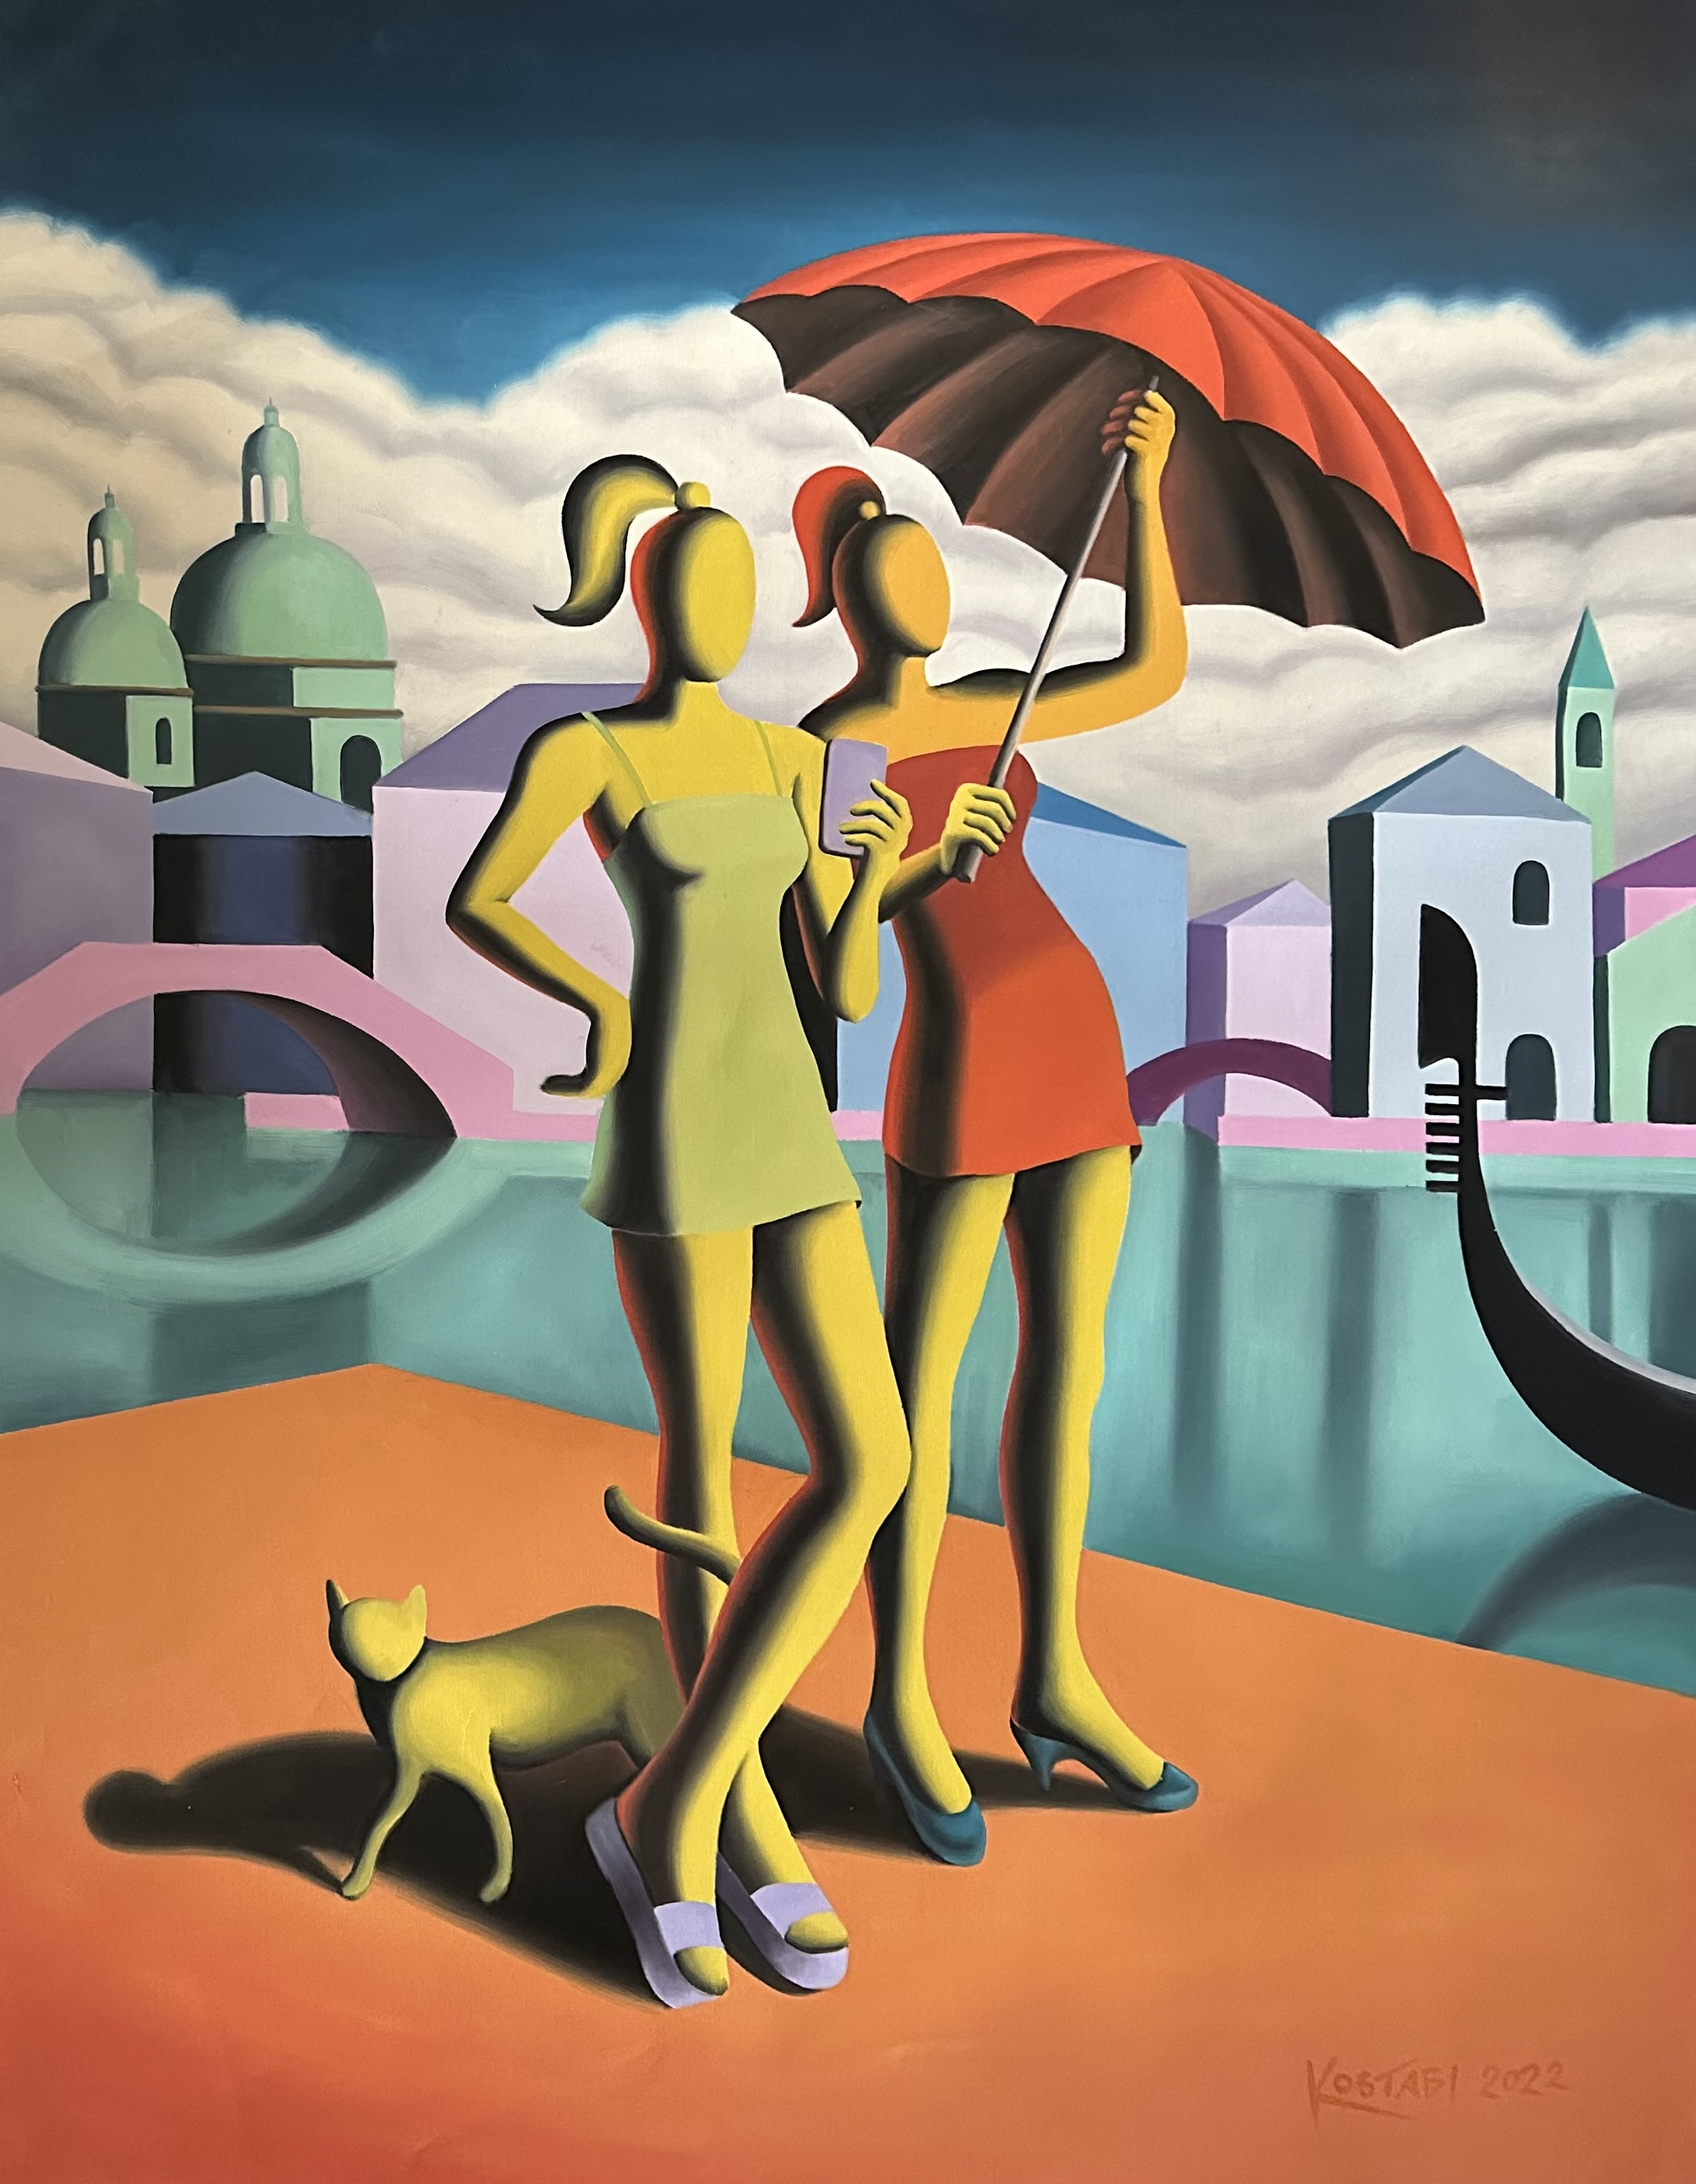 MARK KOSTABI - The Pursuit of Pleasure - Oil on Canvas - 52x40 inches